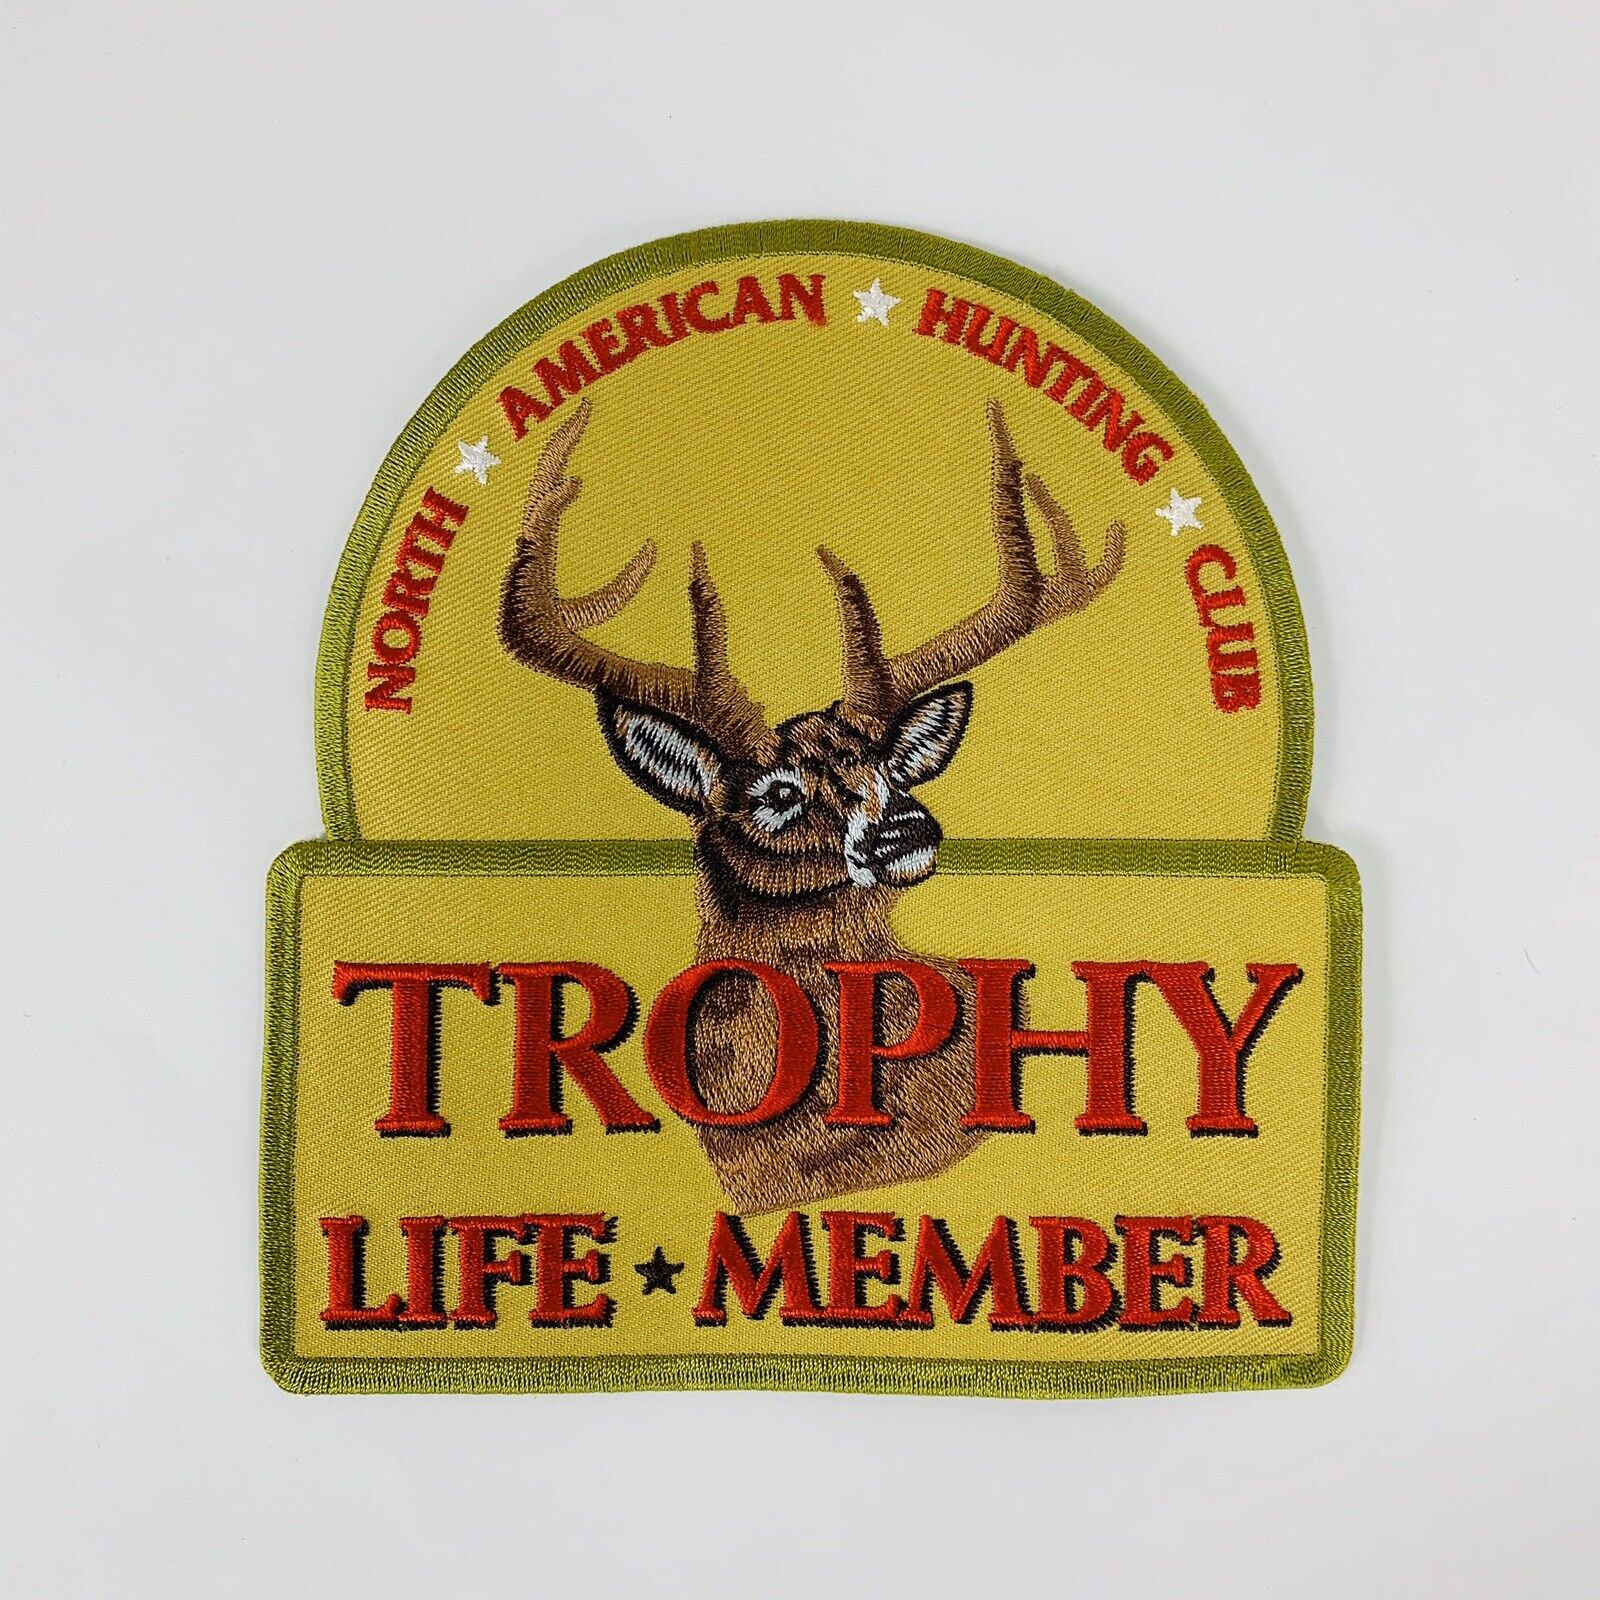 North American Hunting Club Patch Trophy Cheap mail order shopping Deer 6 Member Manufacturer OFFicial shop Buck Life